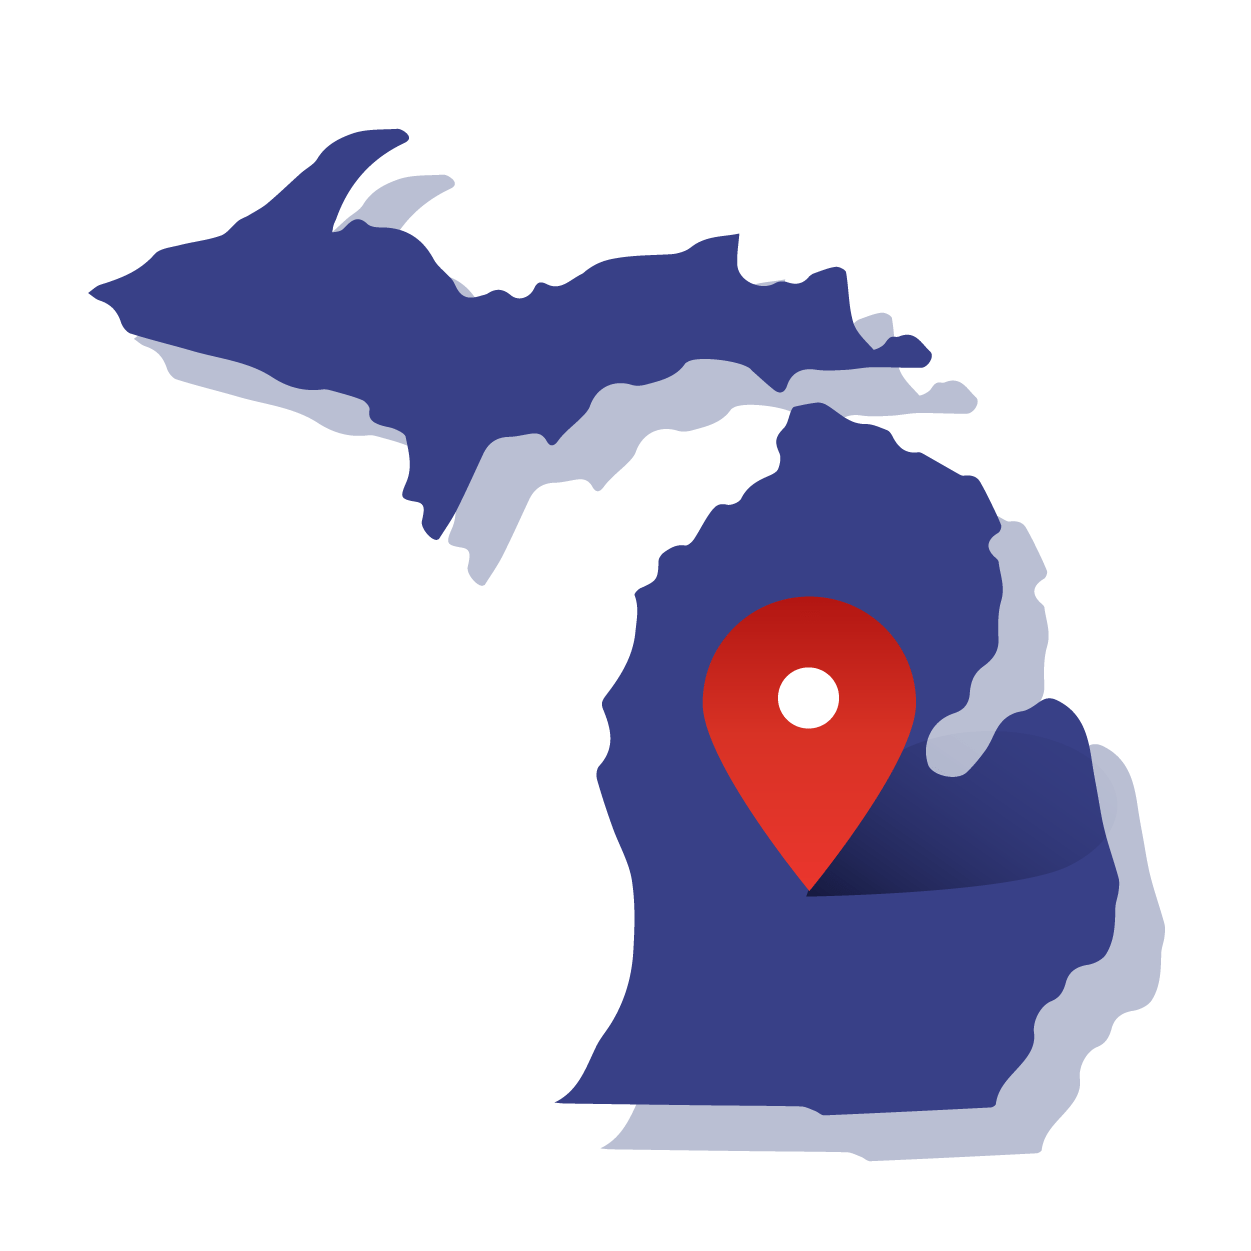 Map of Michigan with its shape outlined, featuring a central map point and a circle representing a radius around that point for demographic analysis of zip codes.